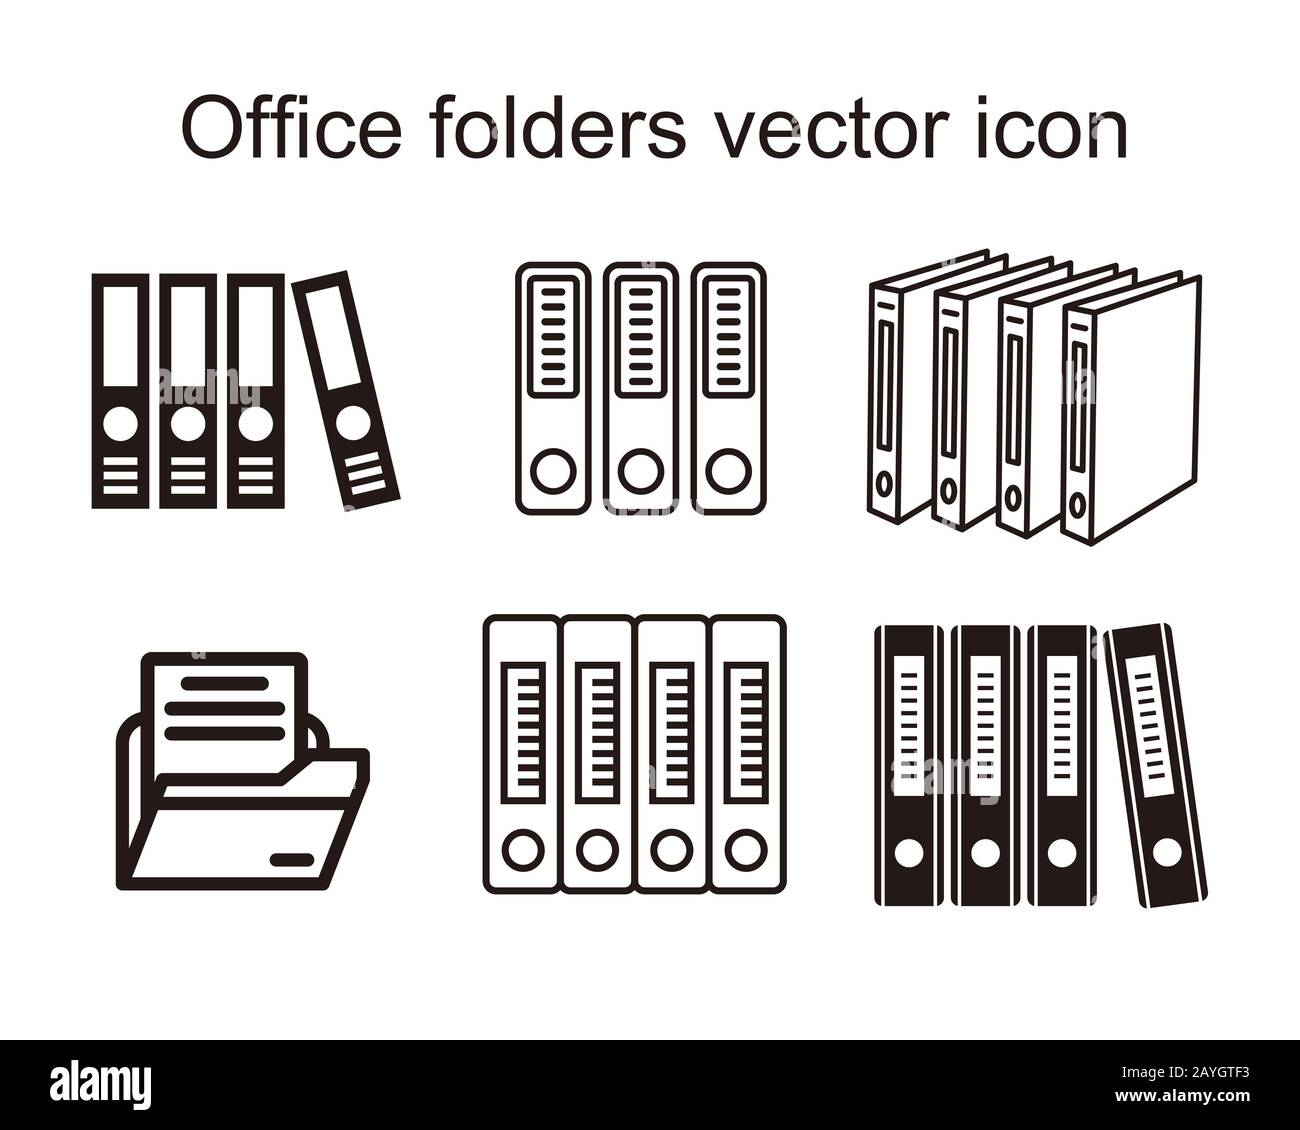 Office folders, Binders vector icon, illustration for graphic and web design. Stock Photo